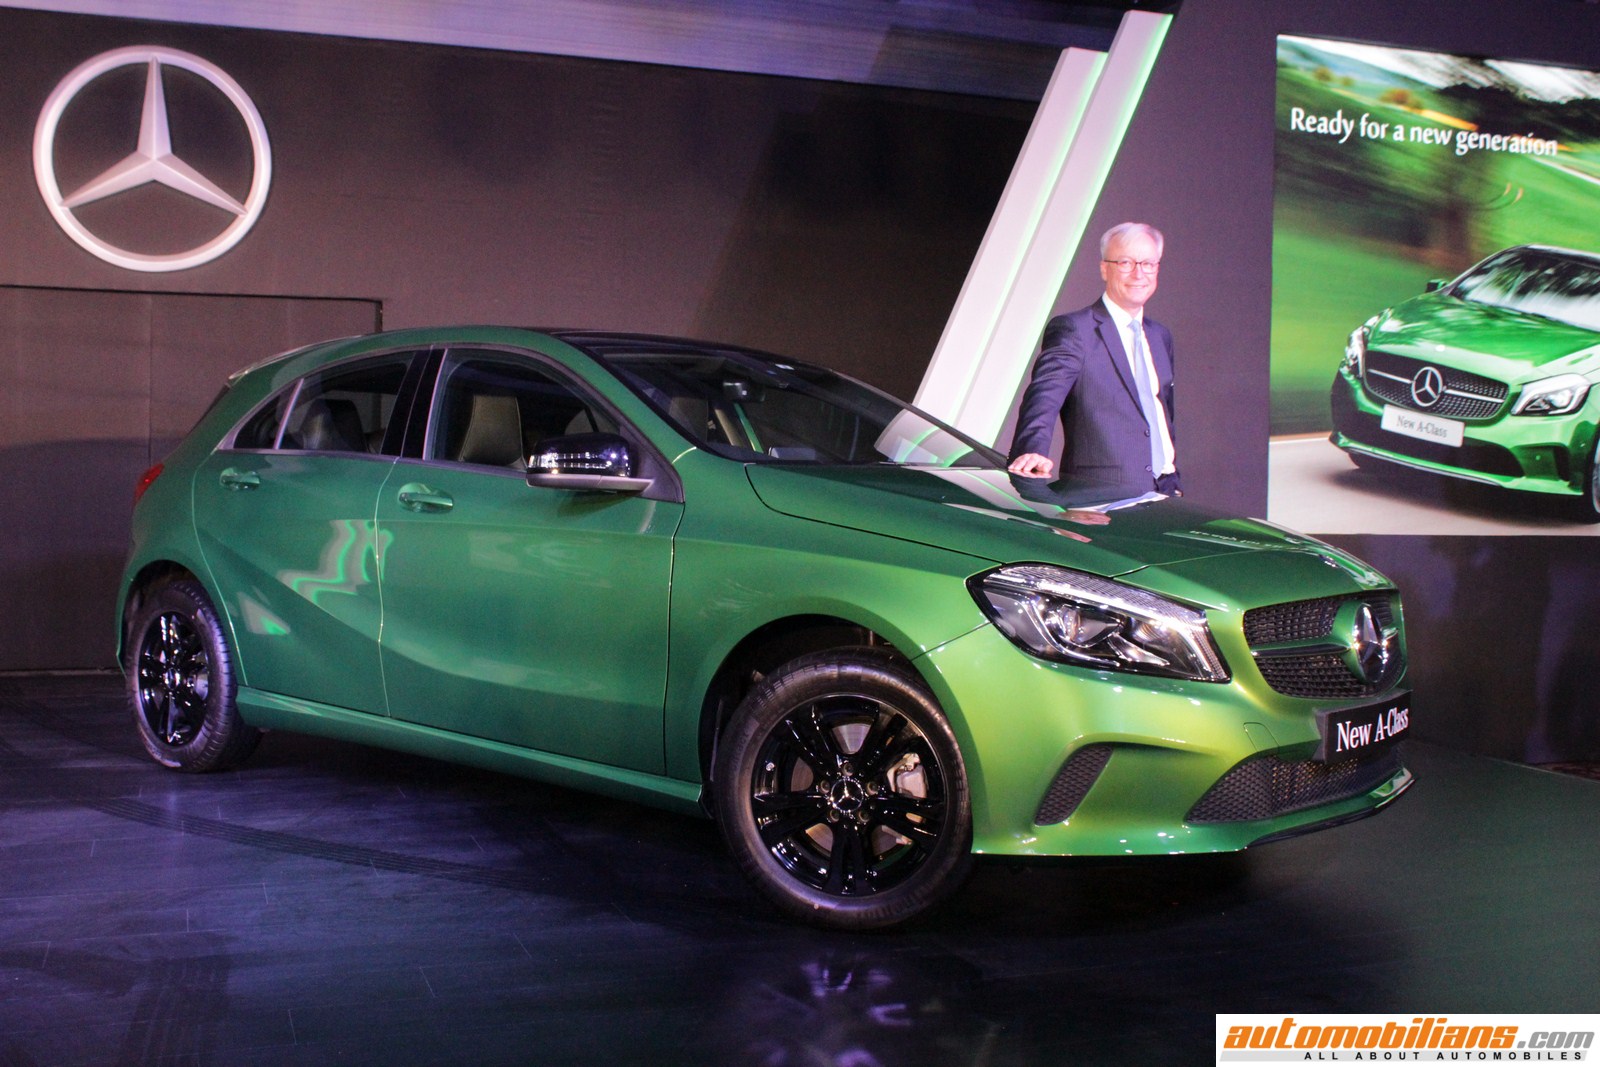 2016 Mercedes-Benz A-Class Facelift Launched In India At Rs. 24.95 Lakhs (Ex-Showroom, Mumbai)